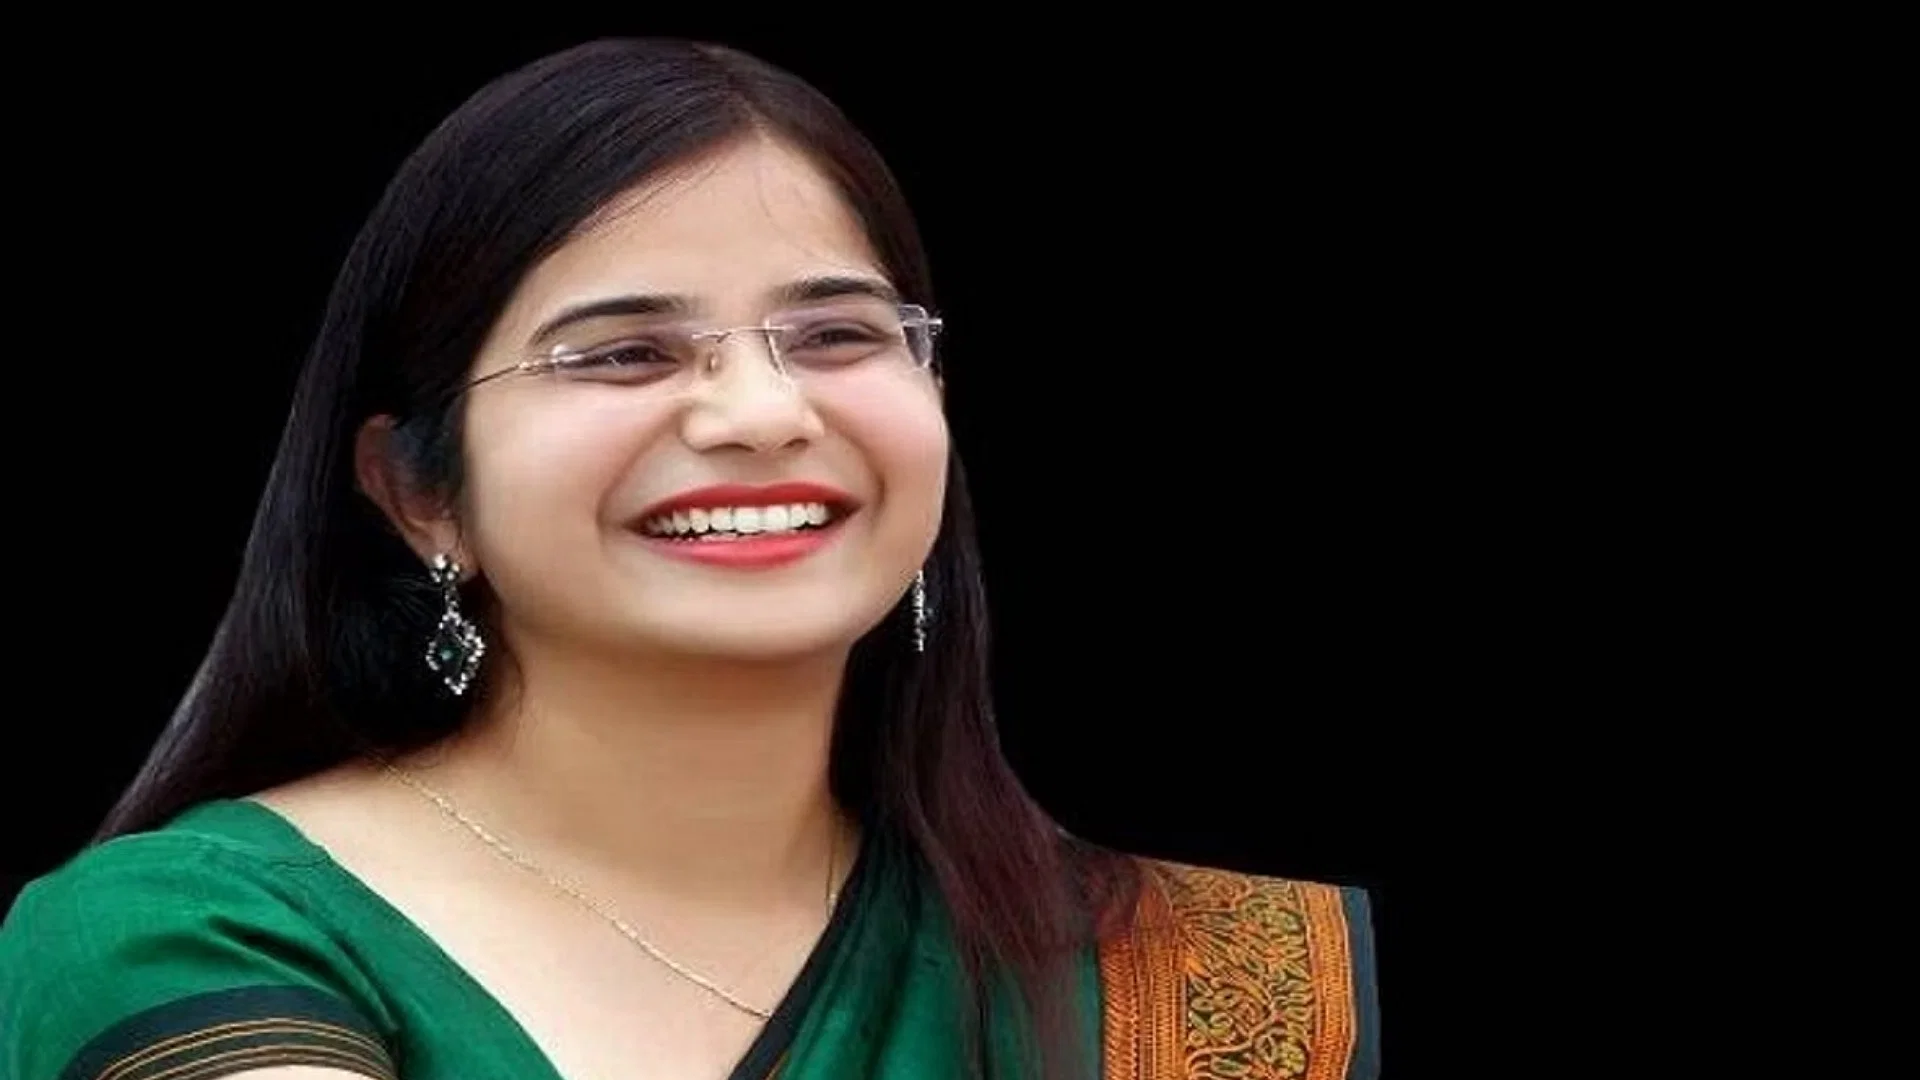 IAS Swati Meena was inspired by her mother who runs a petrol pump